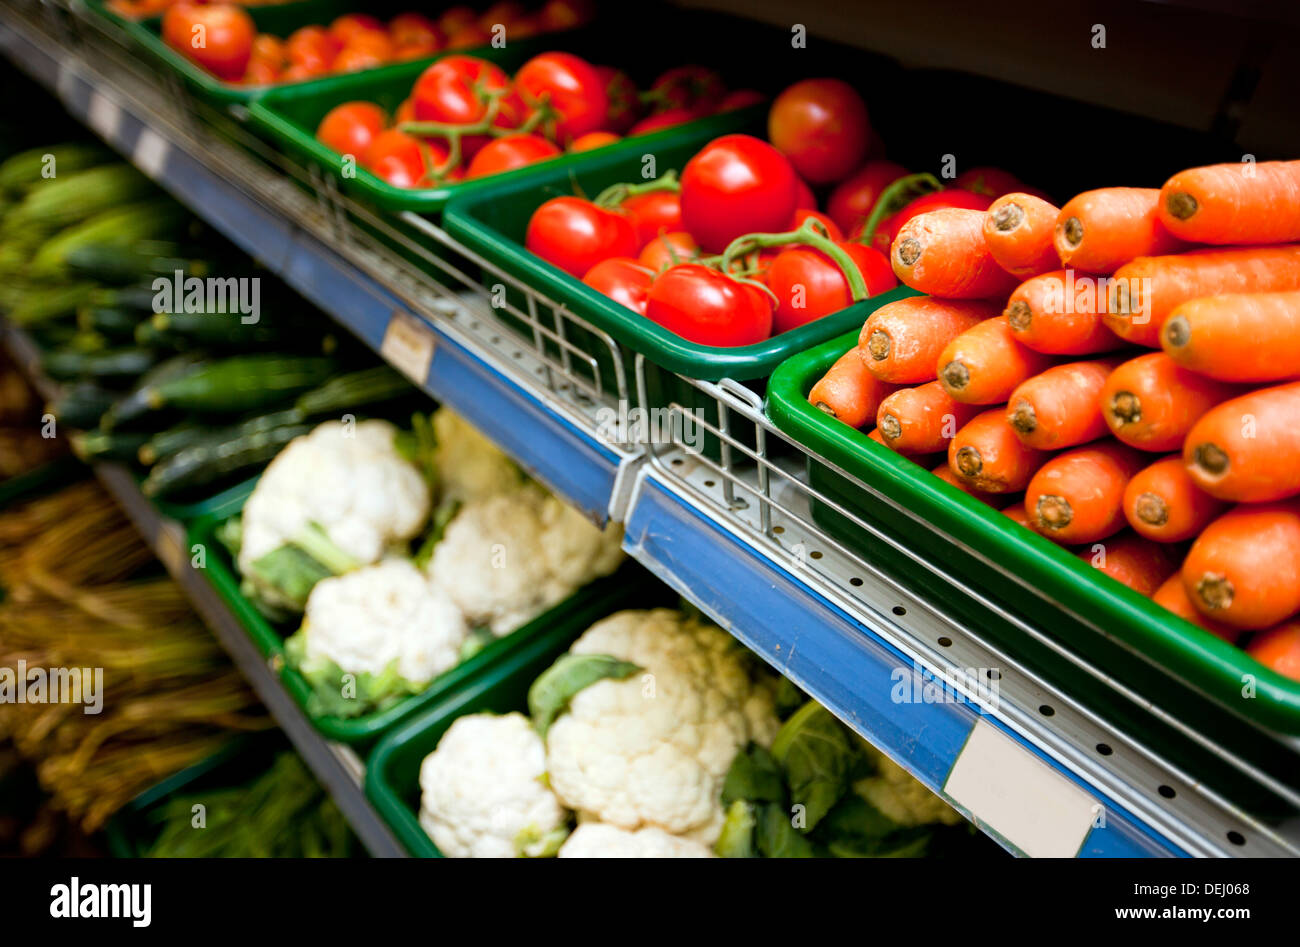 Various vegetables on display grocery store Stock Photo